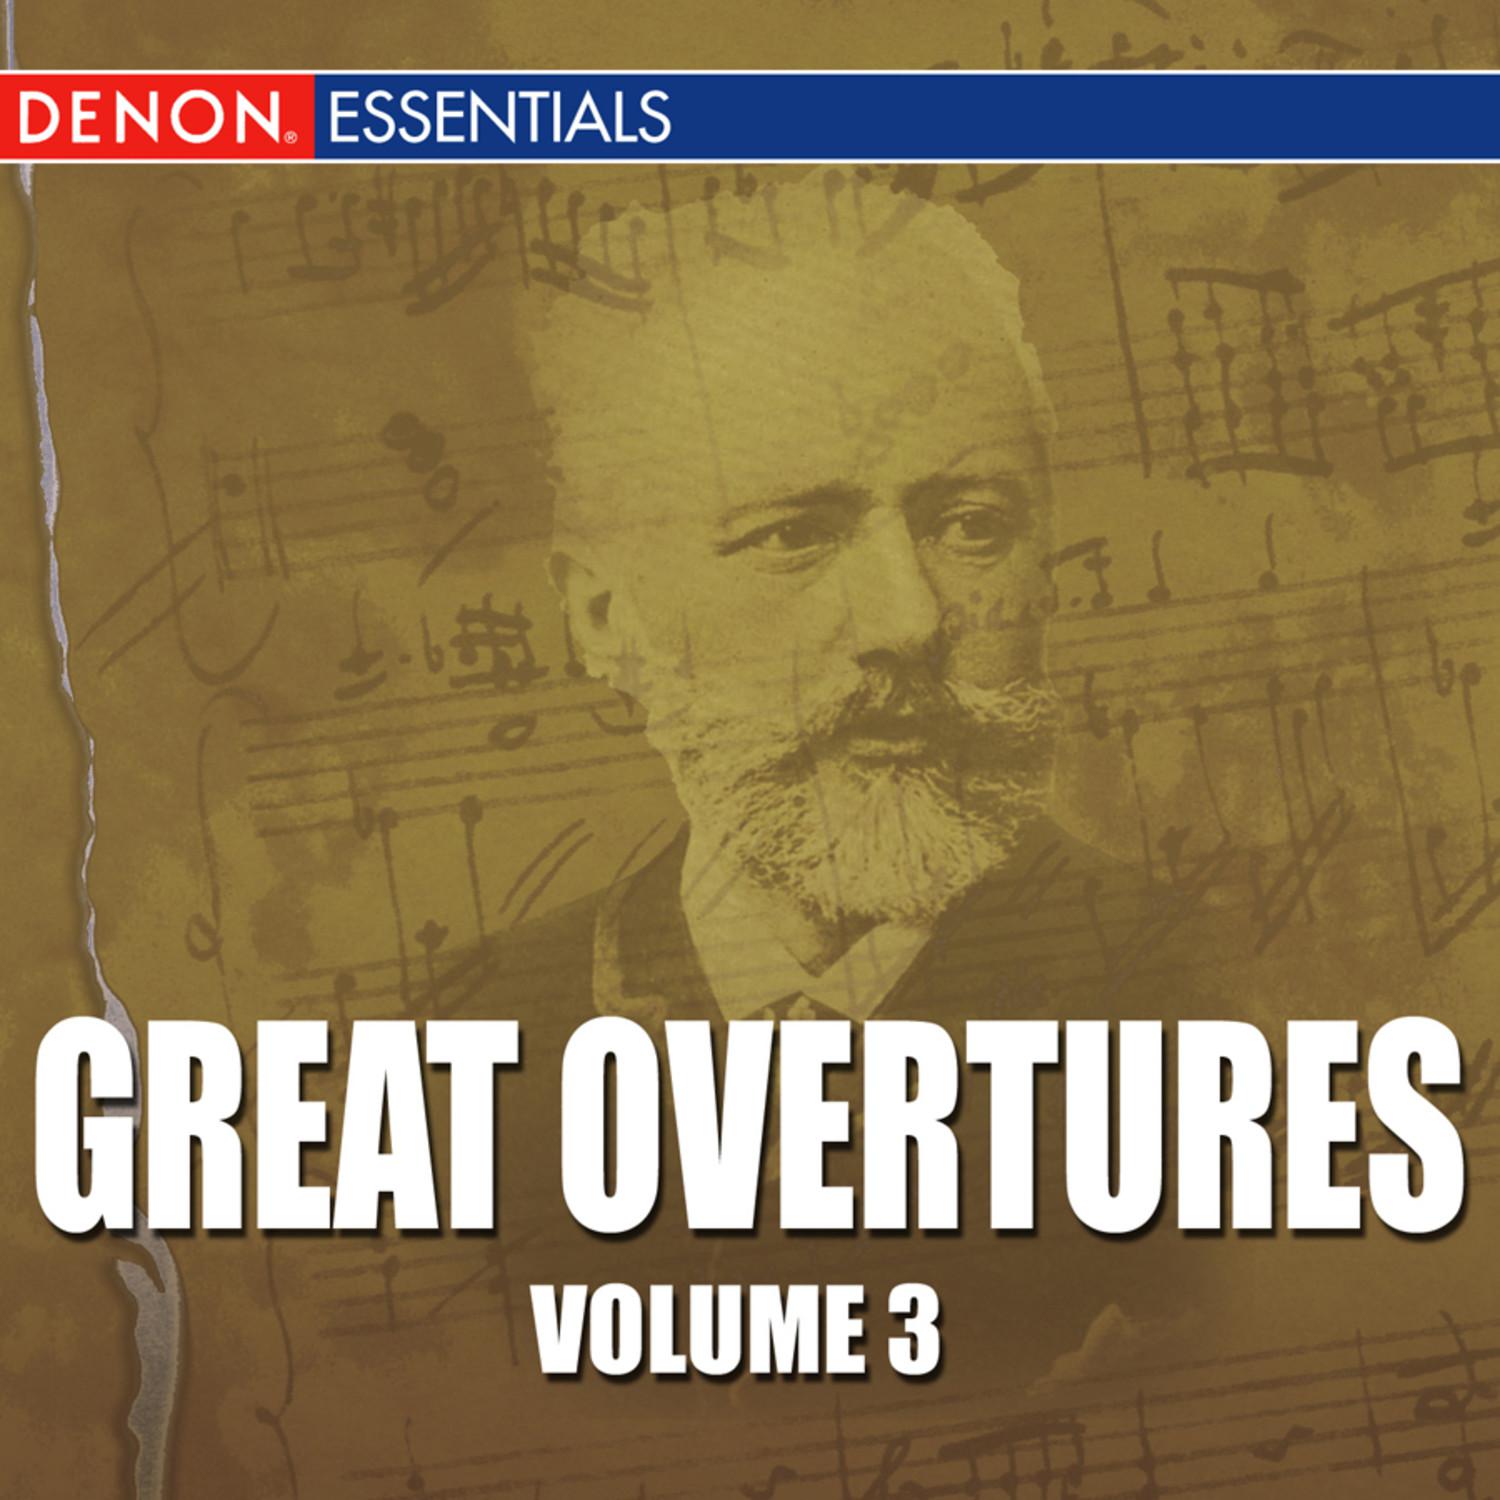 Hermann and Dorothea: Overture